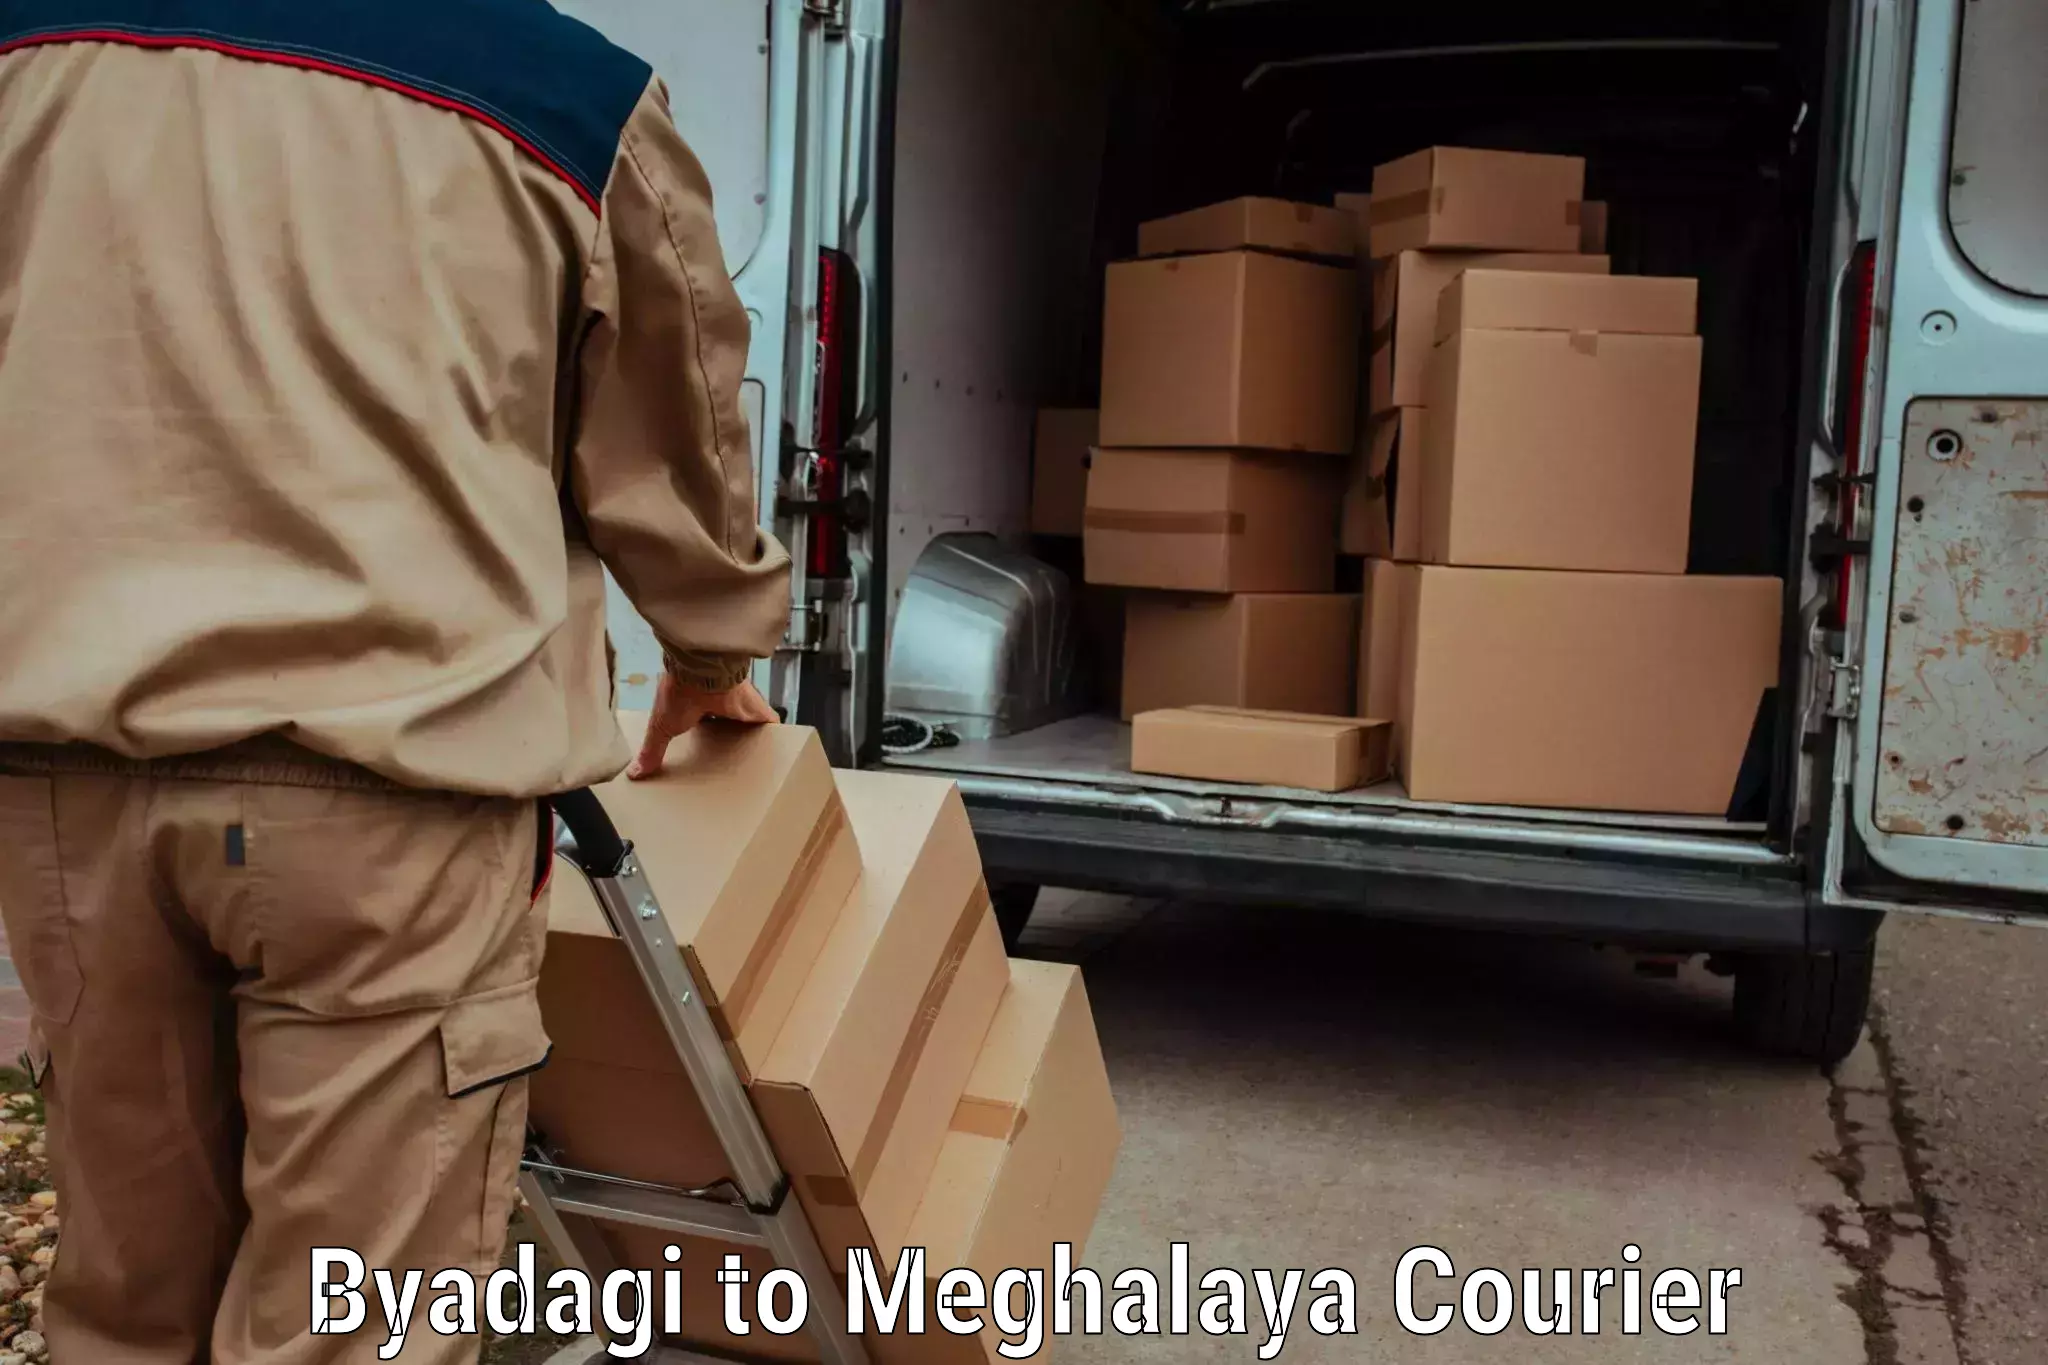 Courier service innovation in Byadagi to Shillong